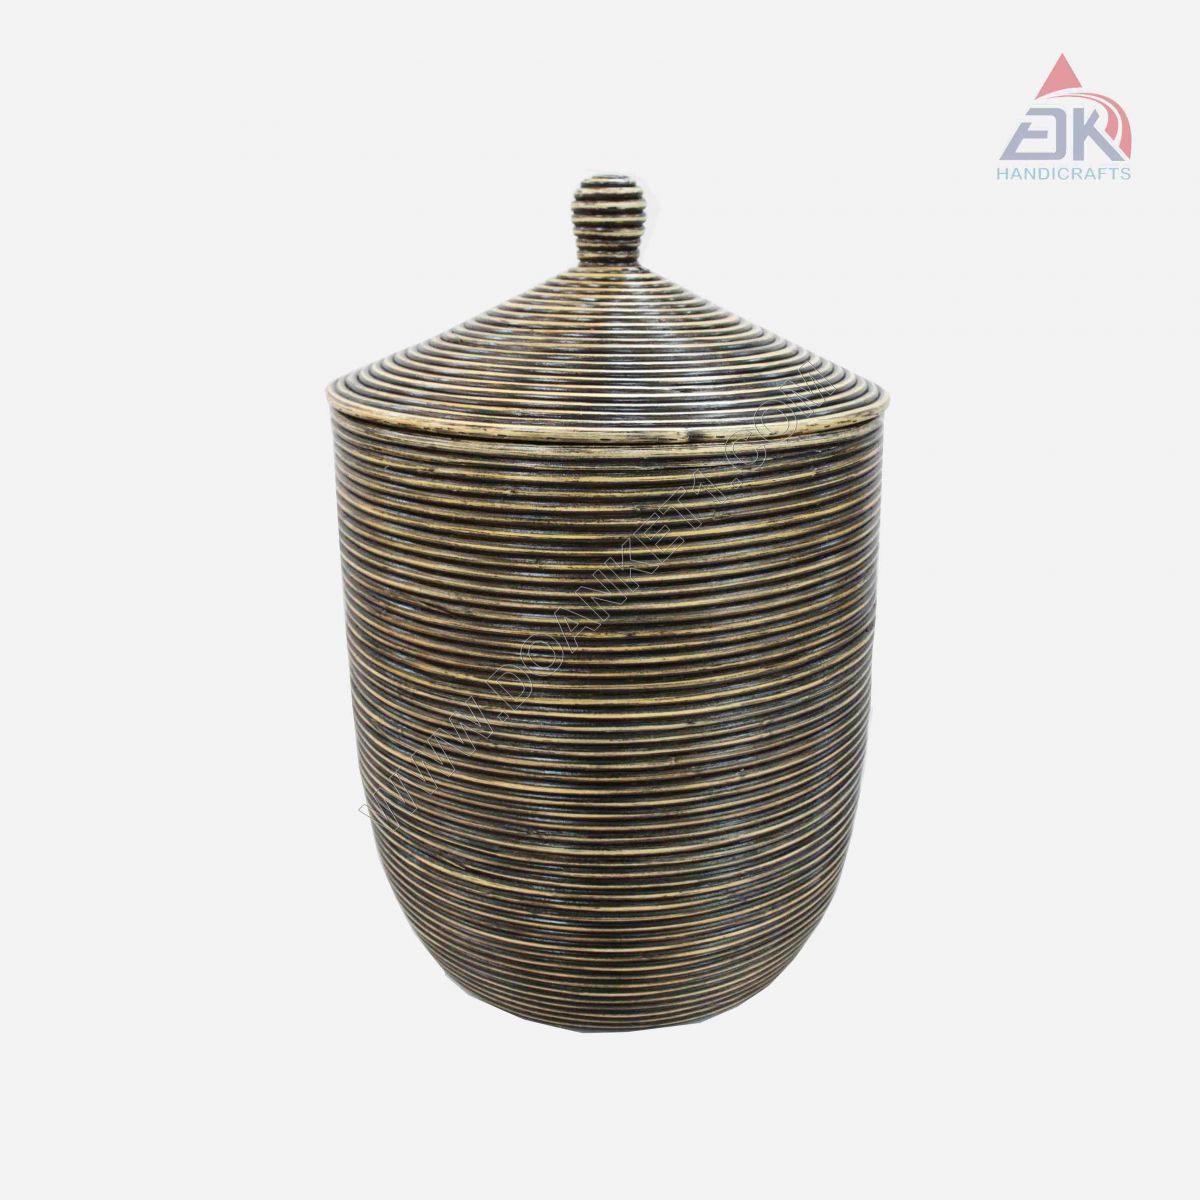 Coiled Basket With Lid # DK46